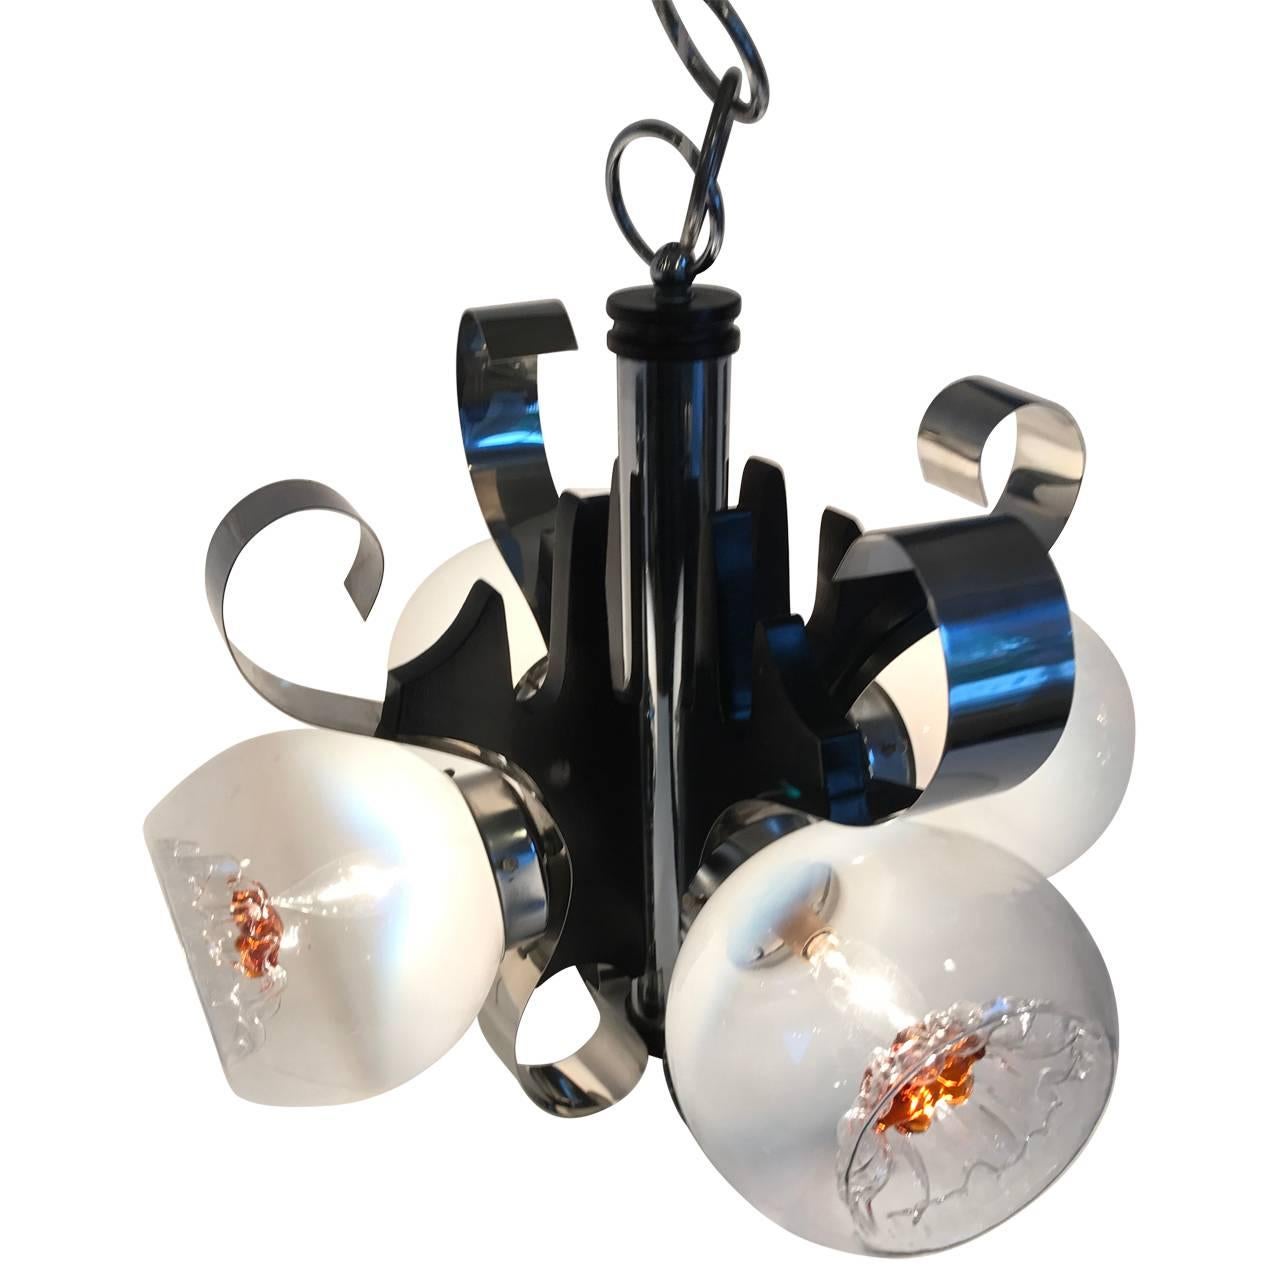 Italian Midcentury four-light ceiling pendant.
Oh, this light fixture is fun in any modern decor! The thick polished chrome gently curves around the frosted glass globes. The ceiling pendant light is perfect for a bathroom, a kitchen light or a